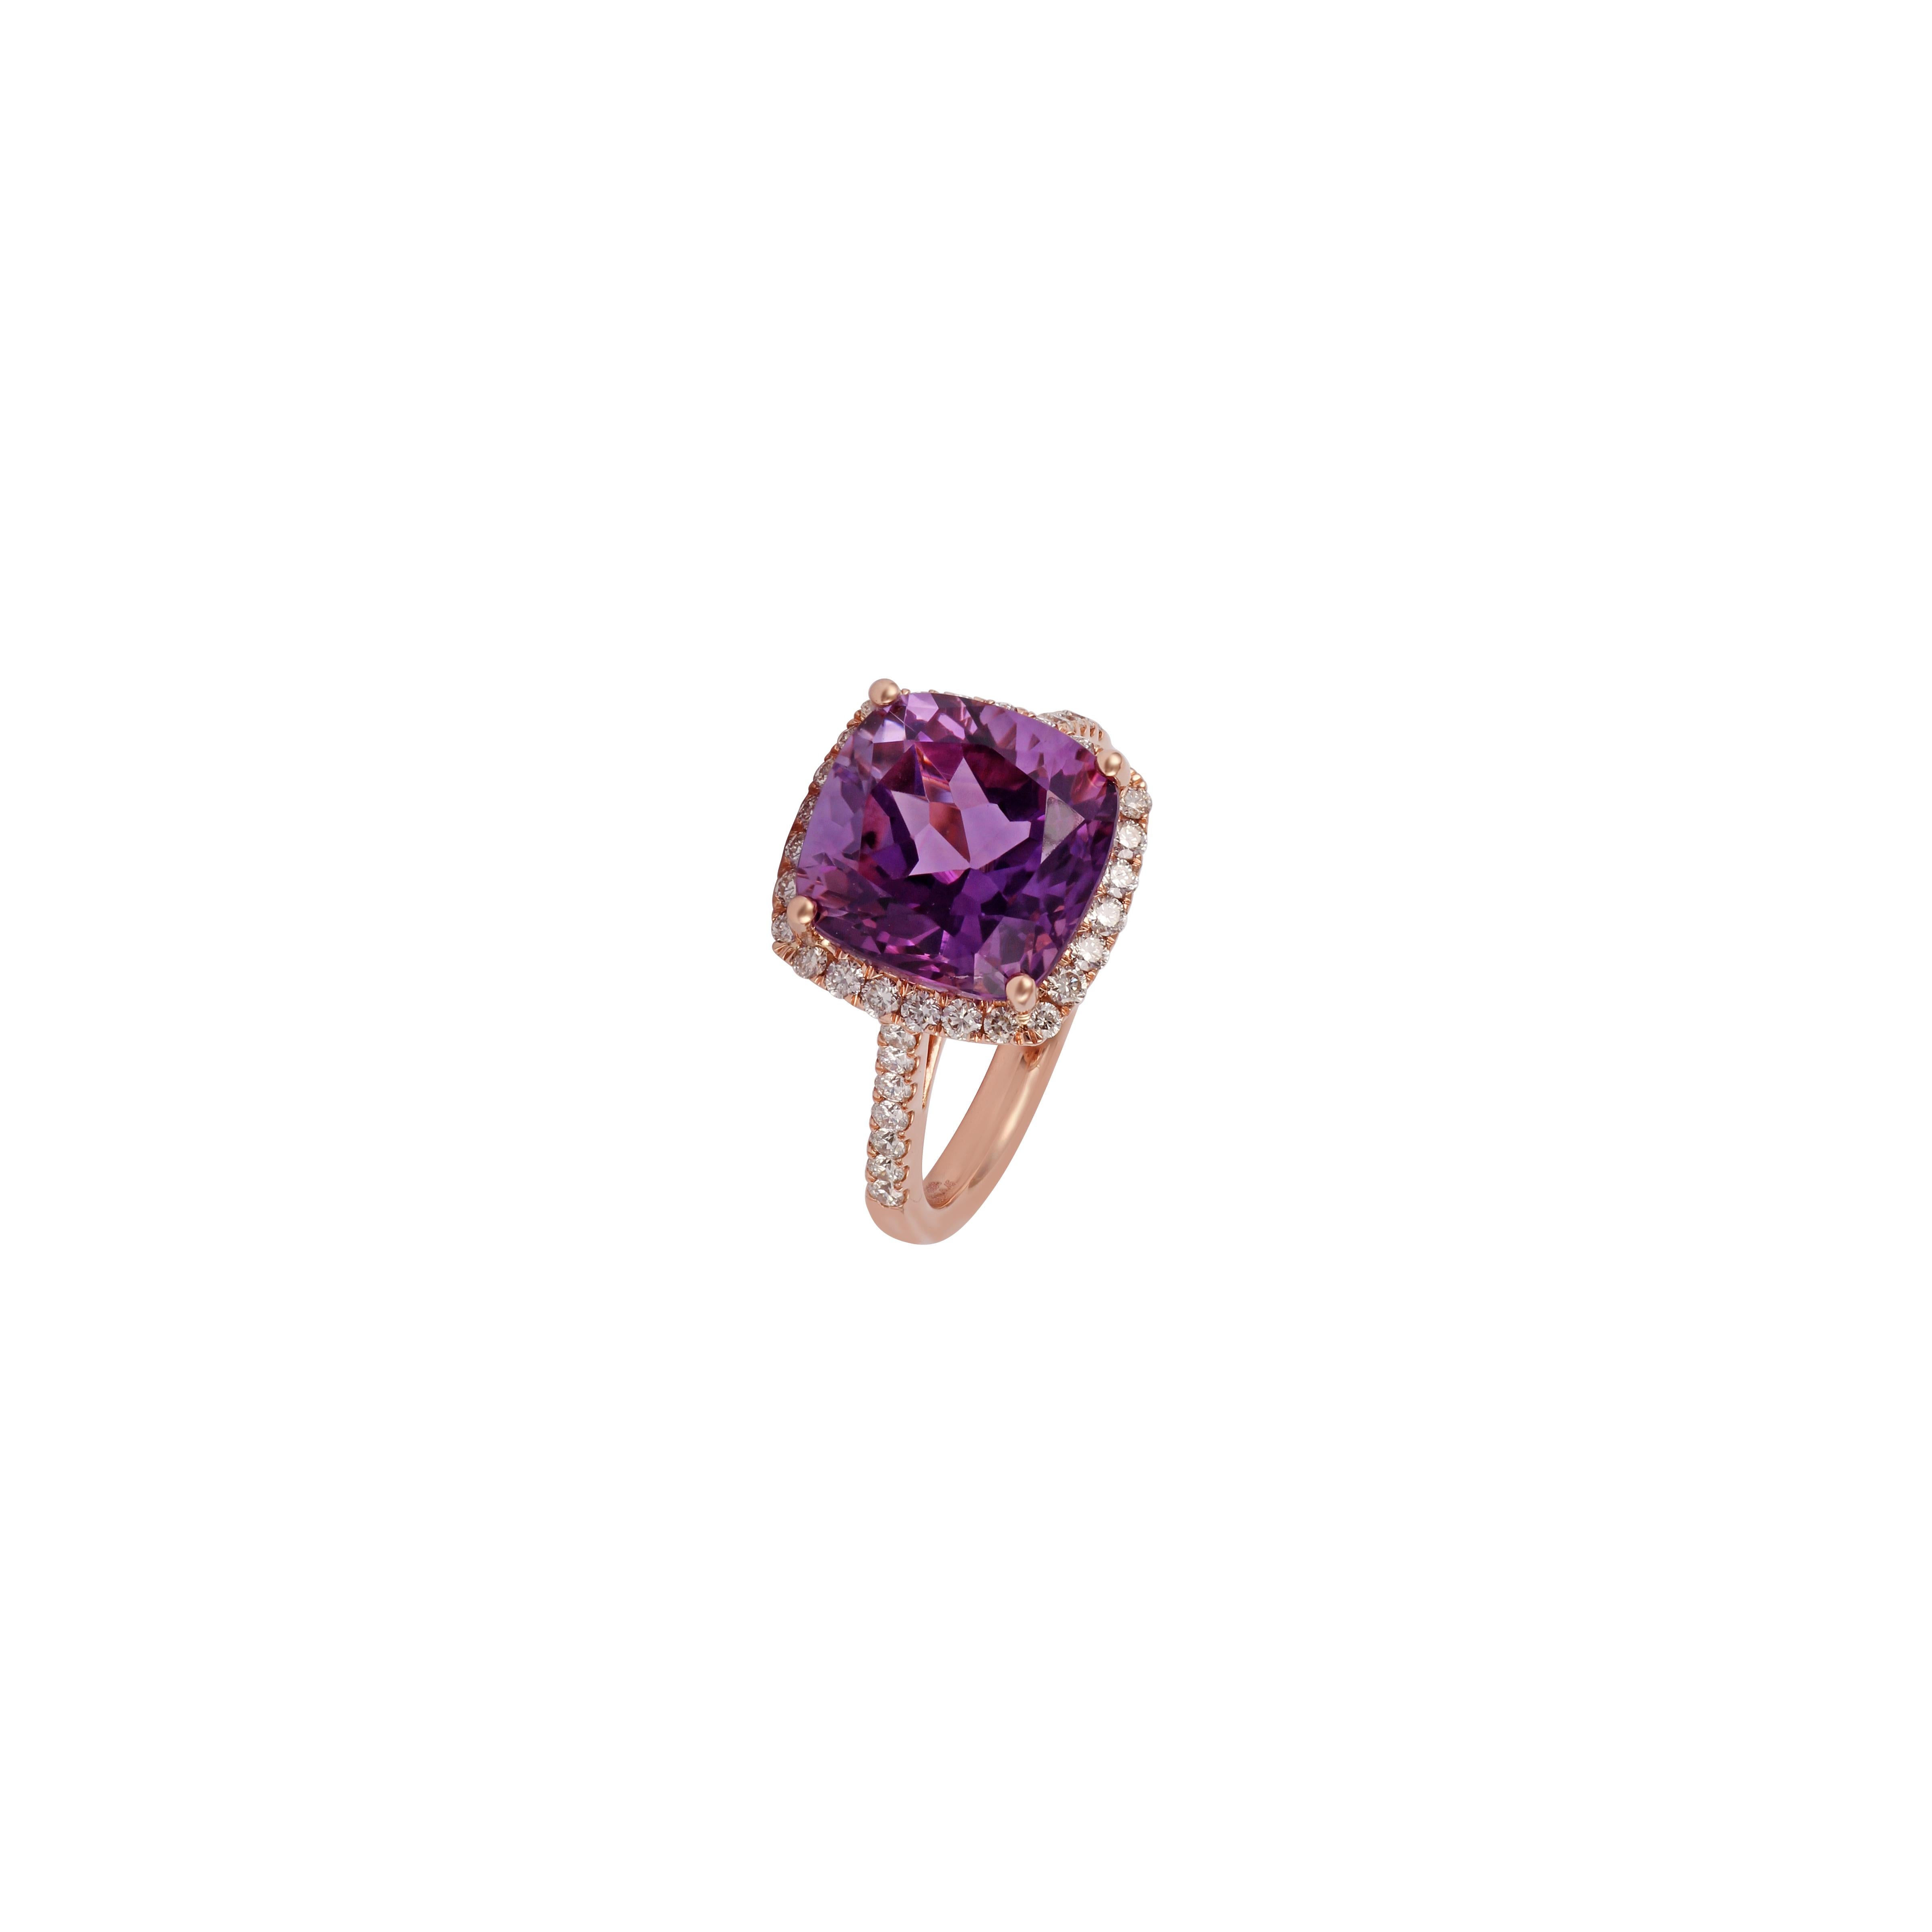 Cushion Cut 4.63 Carat Amethyst Diamond Ring Studded in 18K Rose Gold For Sale